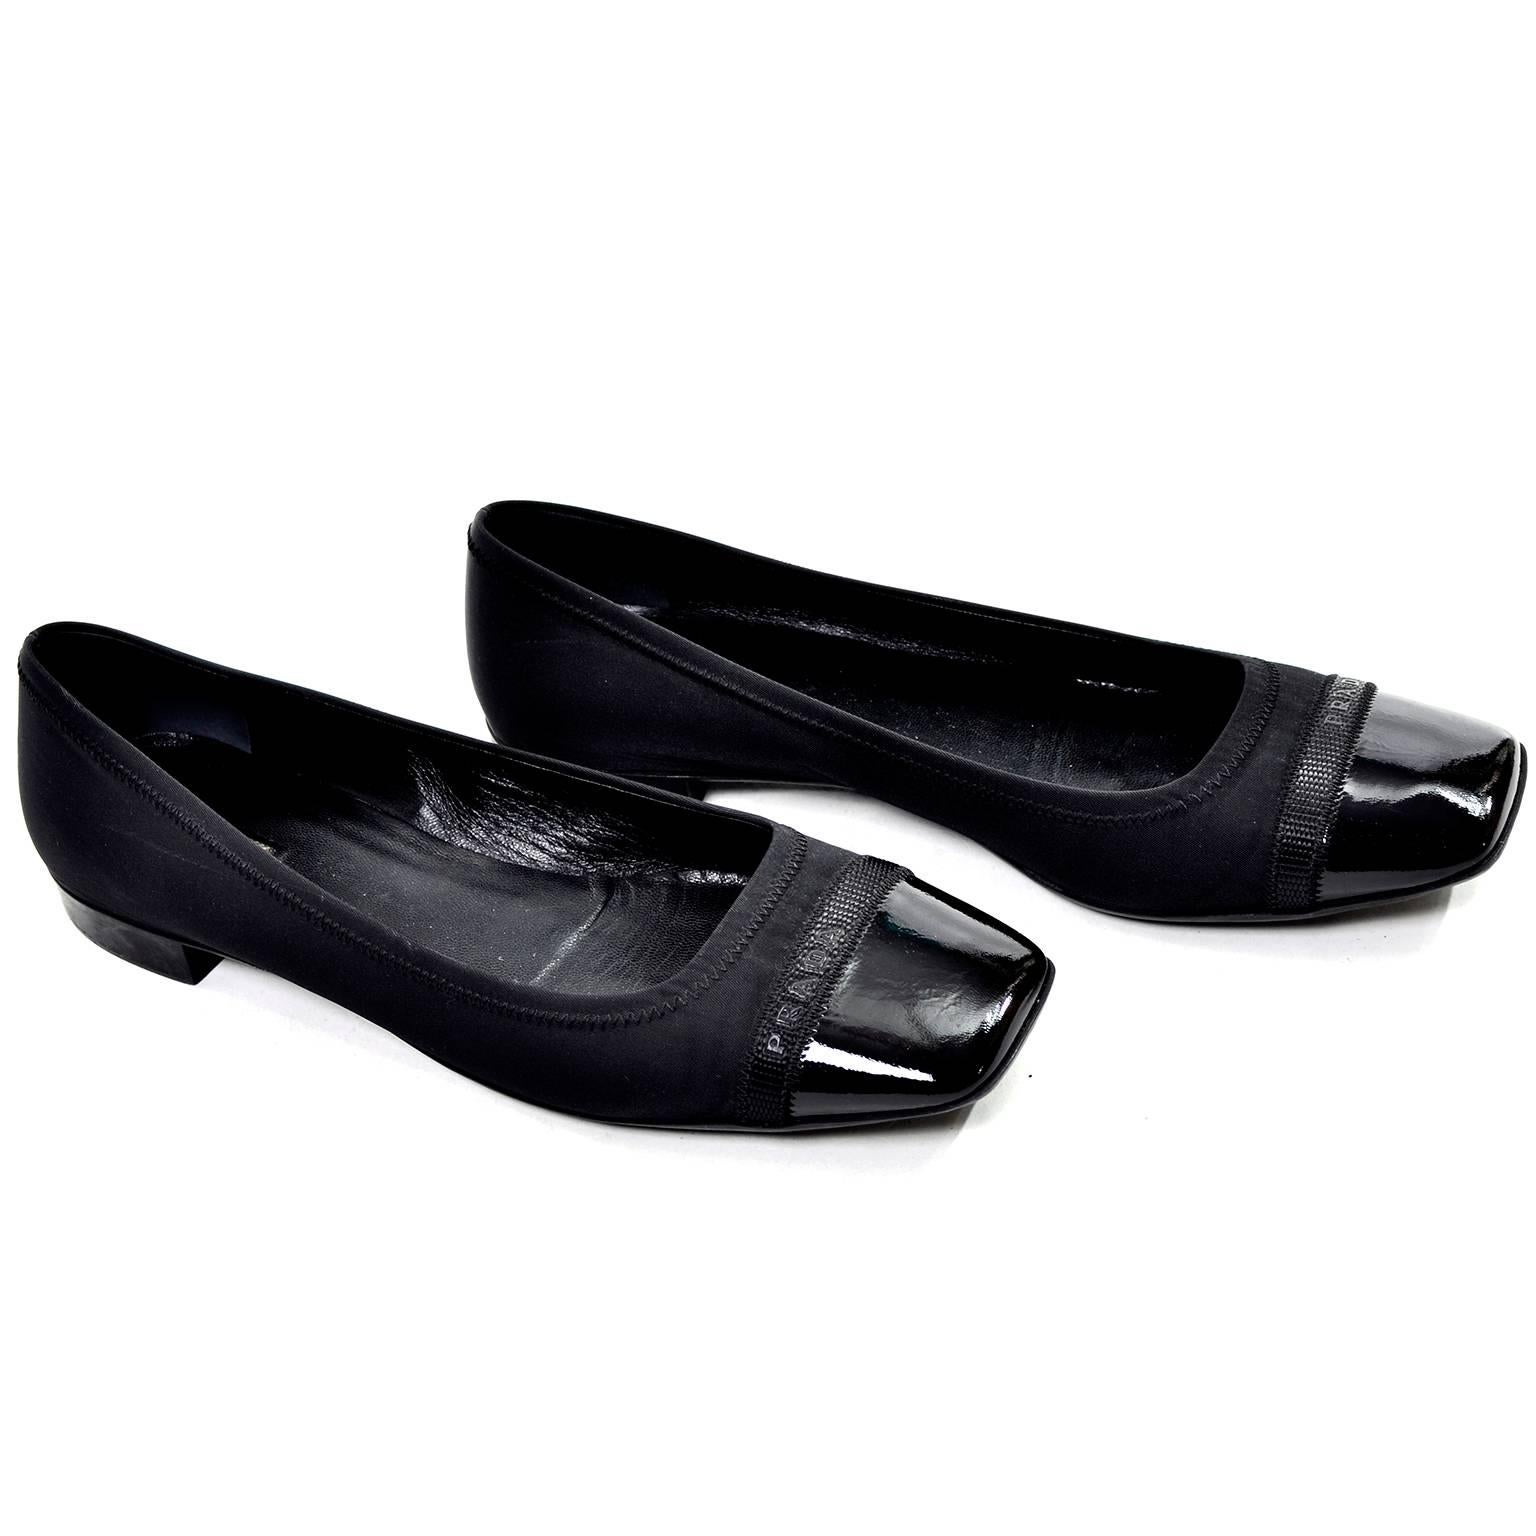 These are classic black Prada flats with a leather-lined fabric upper and a patent leather toe. There is a black ribbon across the toe with 